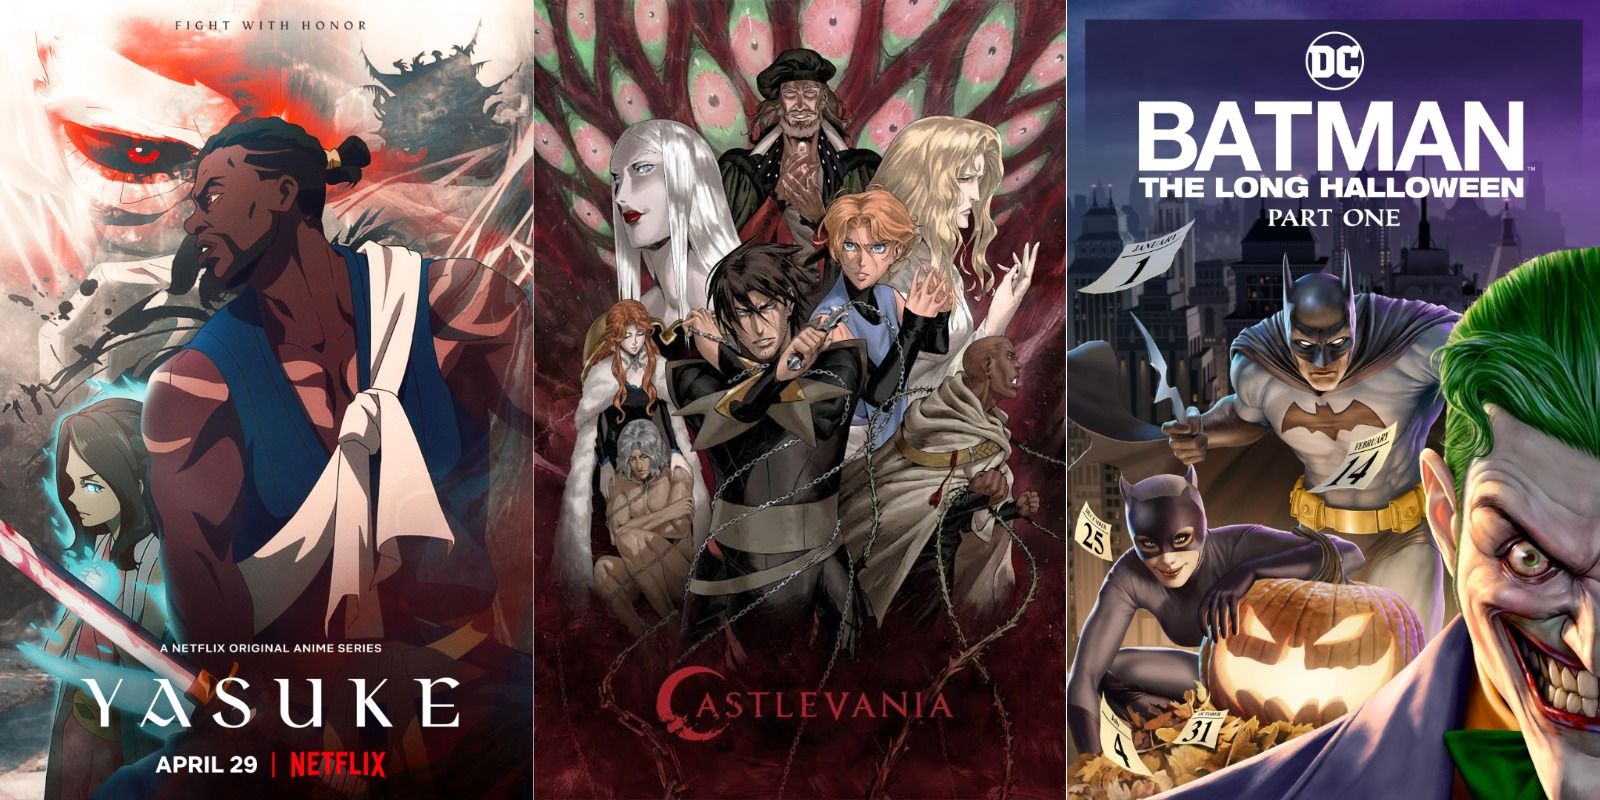 Art for Netflix's Yasuke and Castlevania, and DC's The Long Halloween Part One